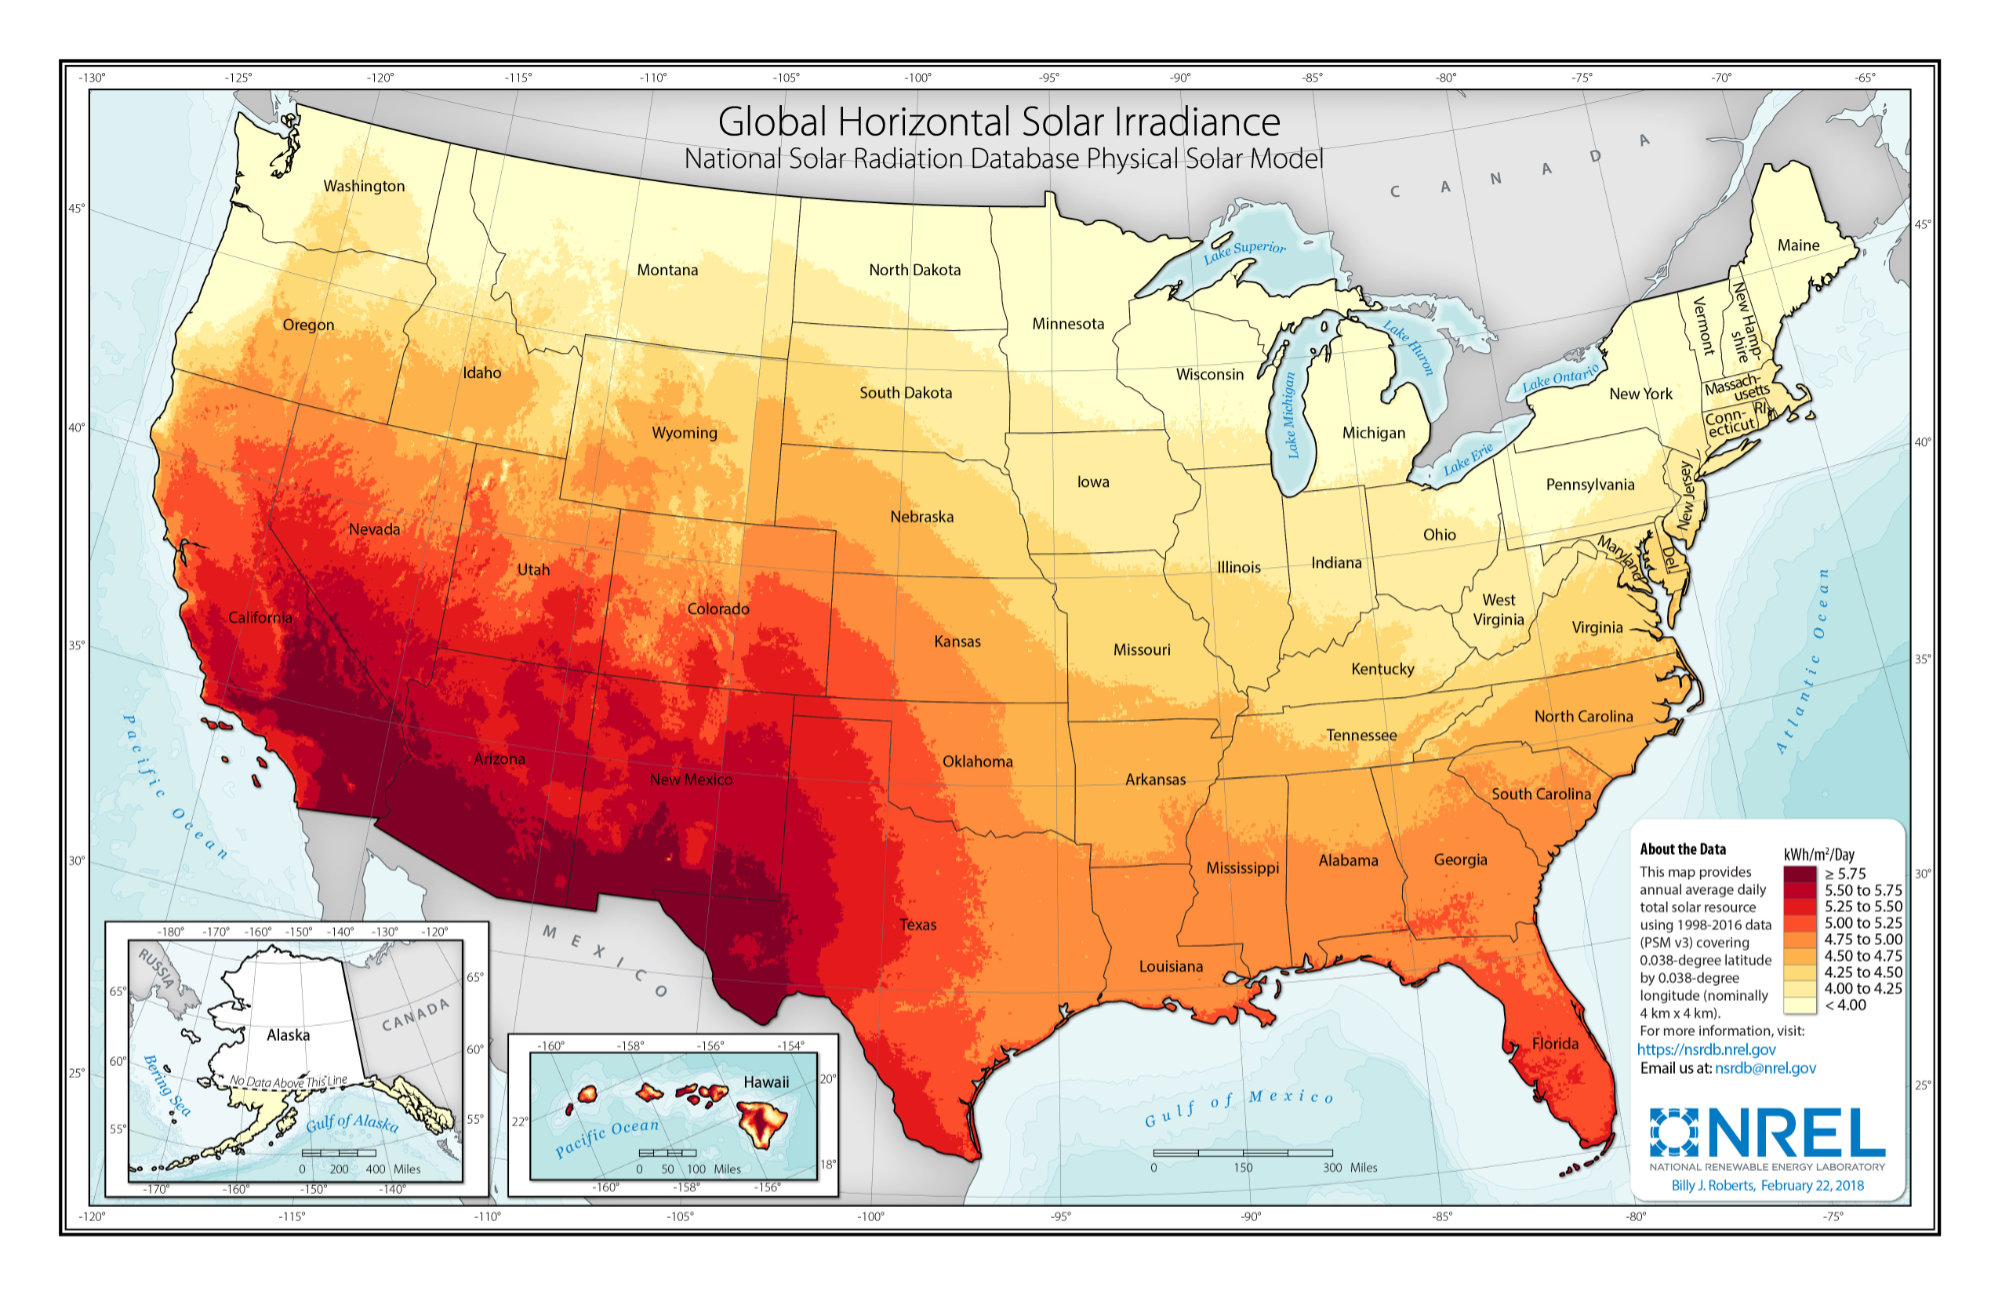 Map of solar energy potential in the US, showing highest potential in the southwest, Florida, and Hawaii.